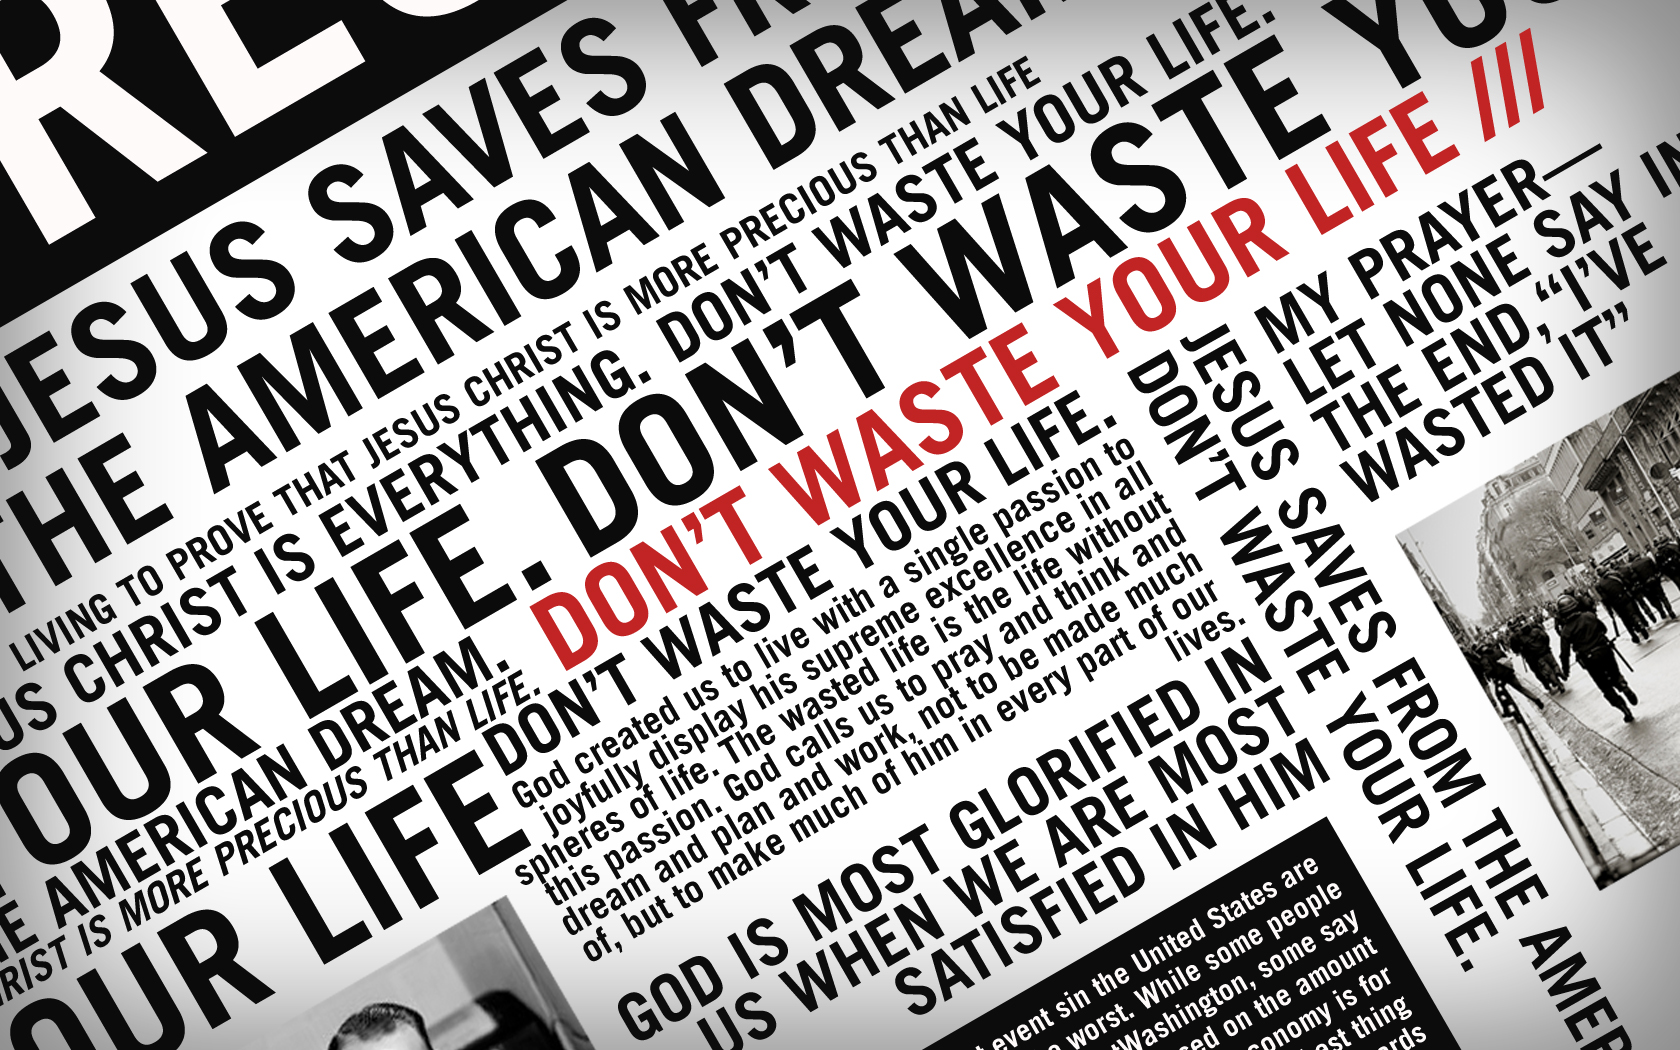 ... not Waste Your Life Wallpaper - Christian Wallpapers and Backgrounds